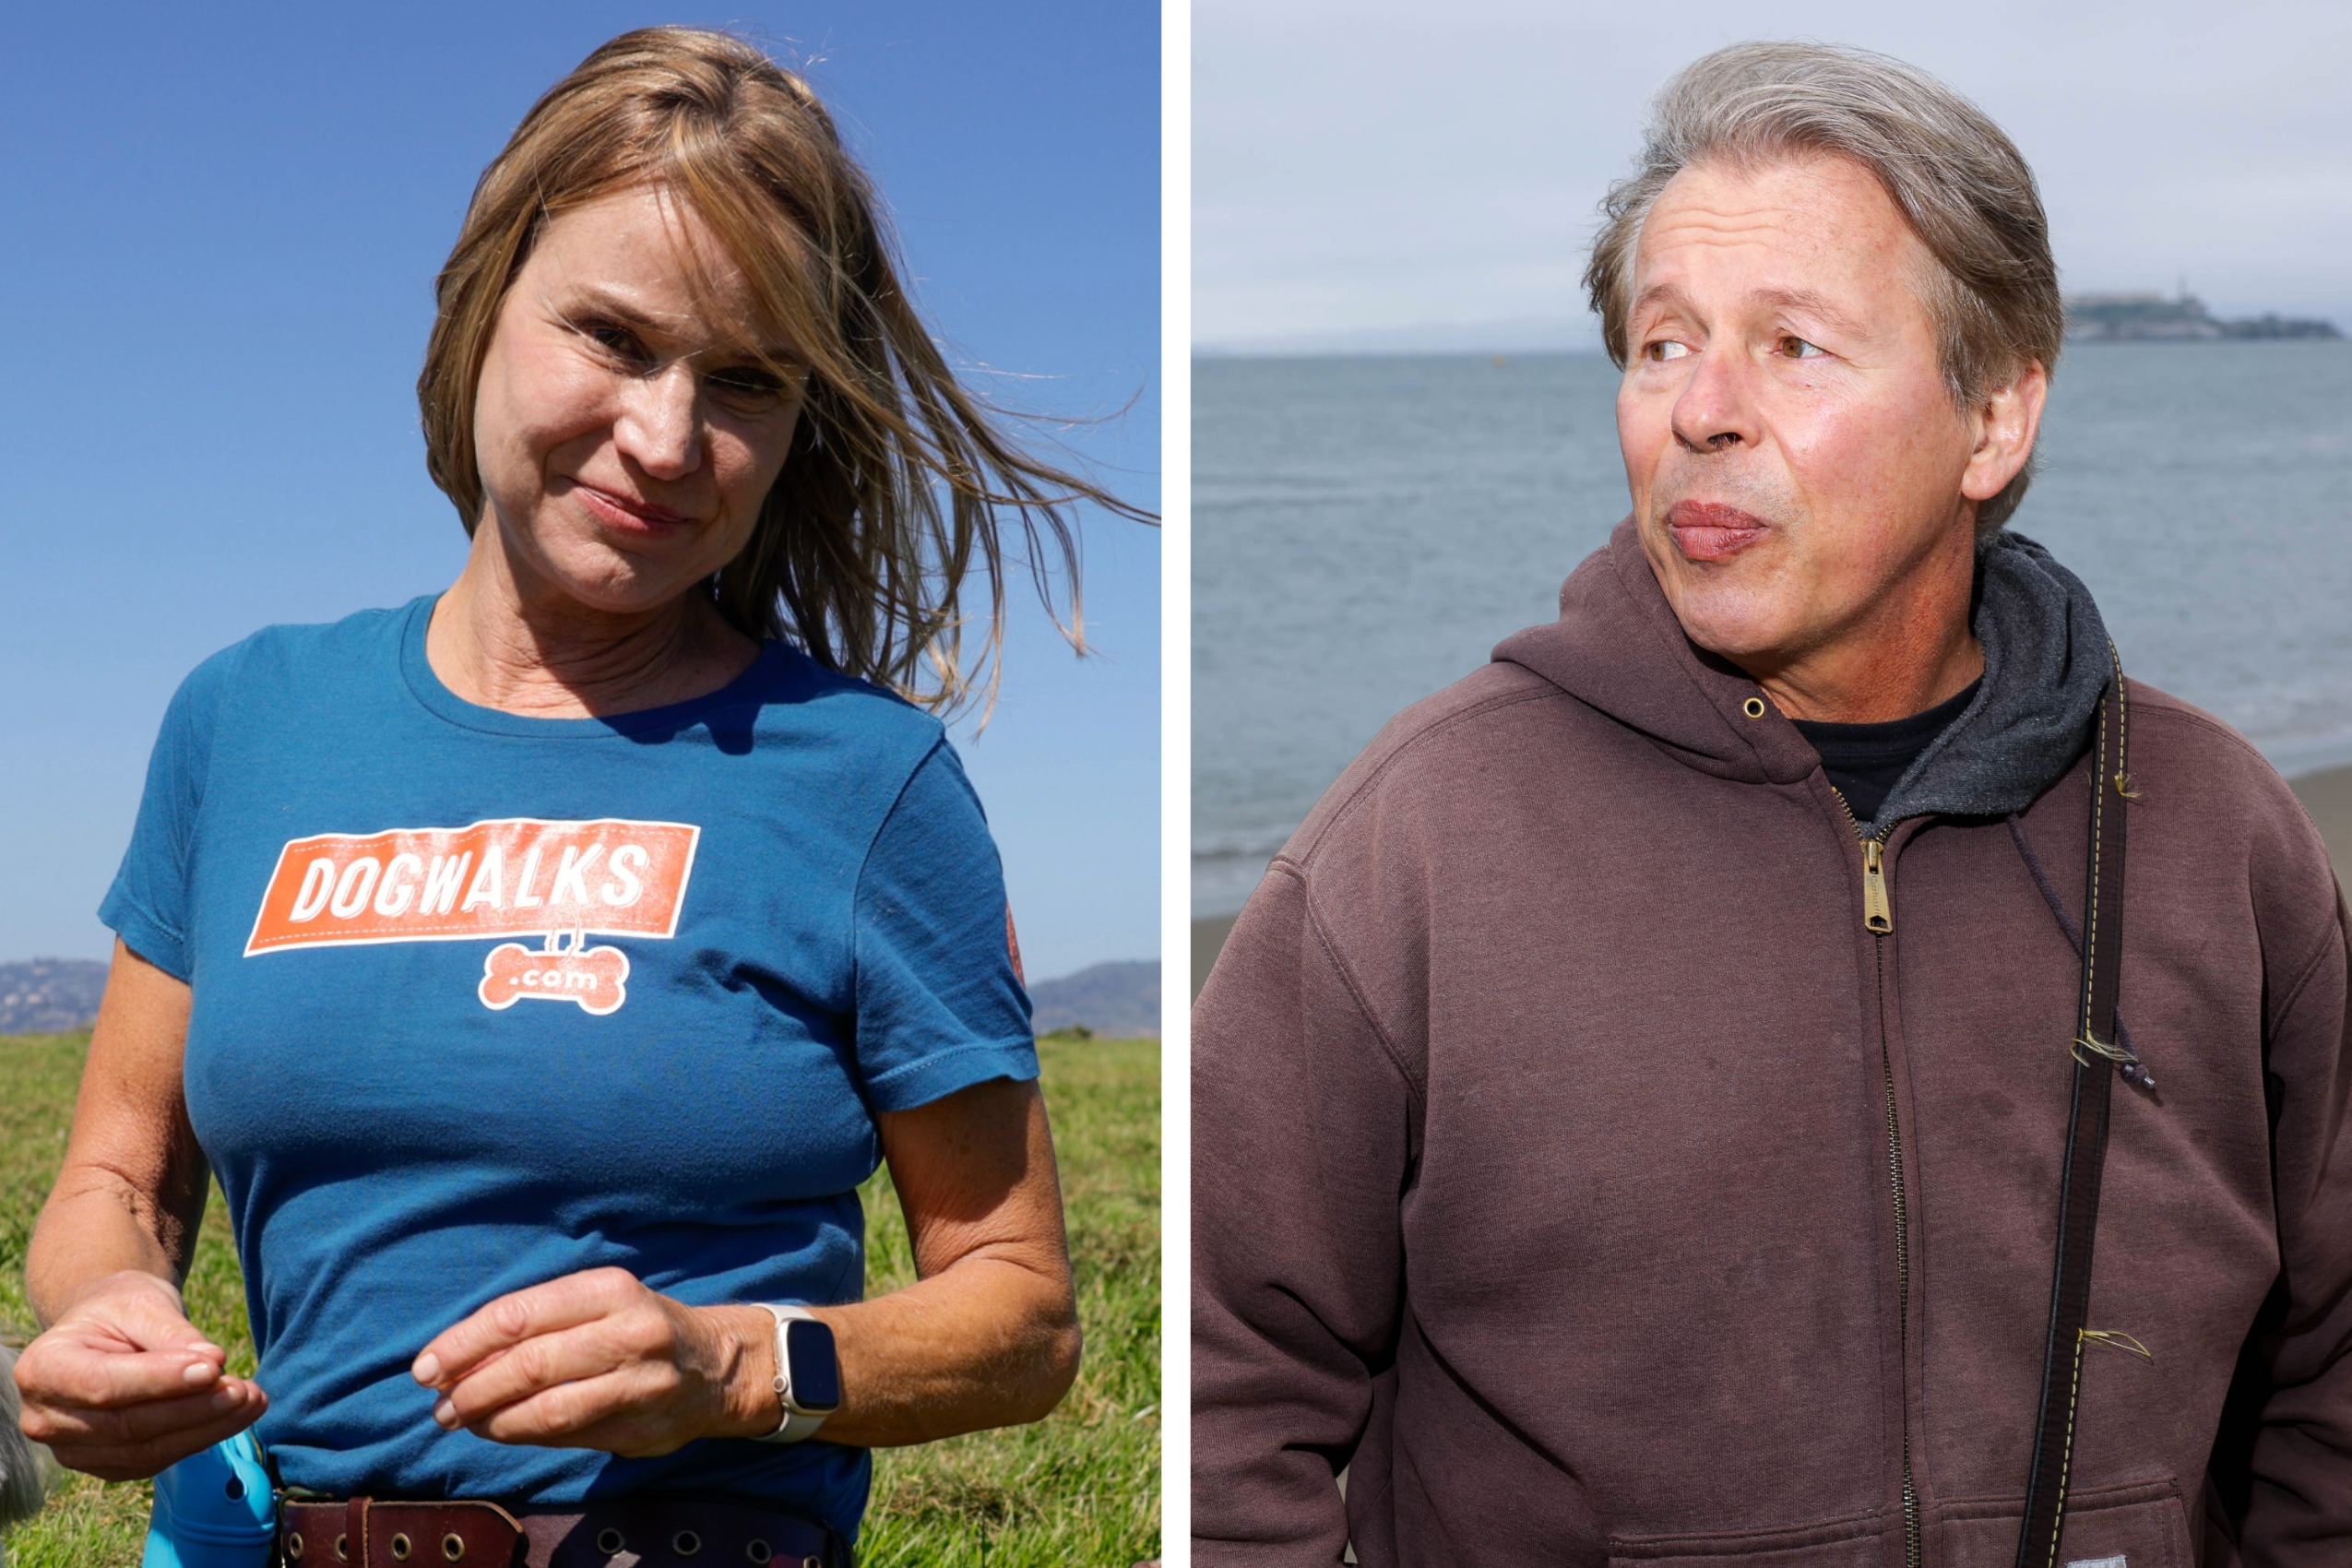 A woman in a blue t-shirt and a man in a brown hoodie are shown outdoors in separate side-by-side images.